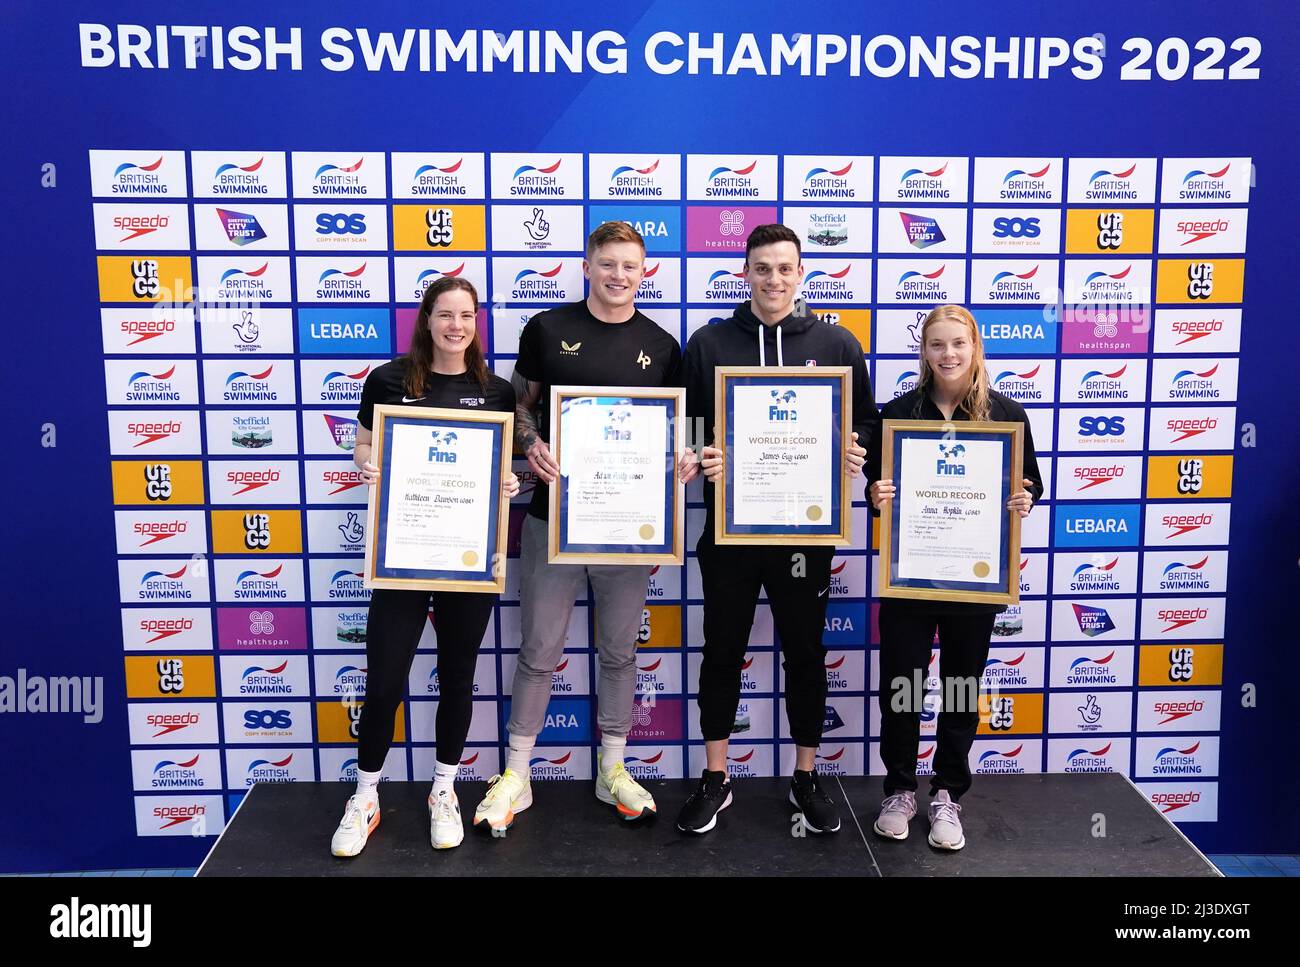 Great Britain's Kathleen Dawson, Adam Peaty, James Guy and Anna Hopkin are awarded their official certificates for setting a new world record in the Mixed 4 x 100m Medley Relay at the Tokyo Olympic Games during day three of the 2022 British Swimming Championships at Ponds Forge International Swimming Centre, Sheffield. Picture date: Thursday April 7, 2022. Stock Photo